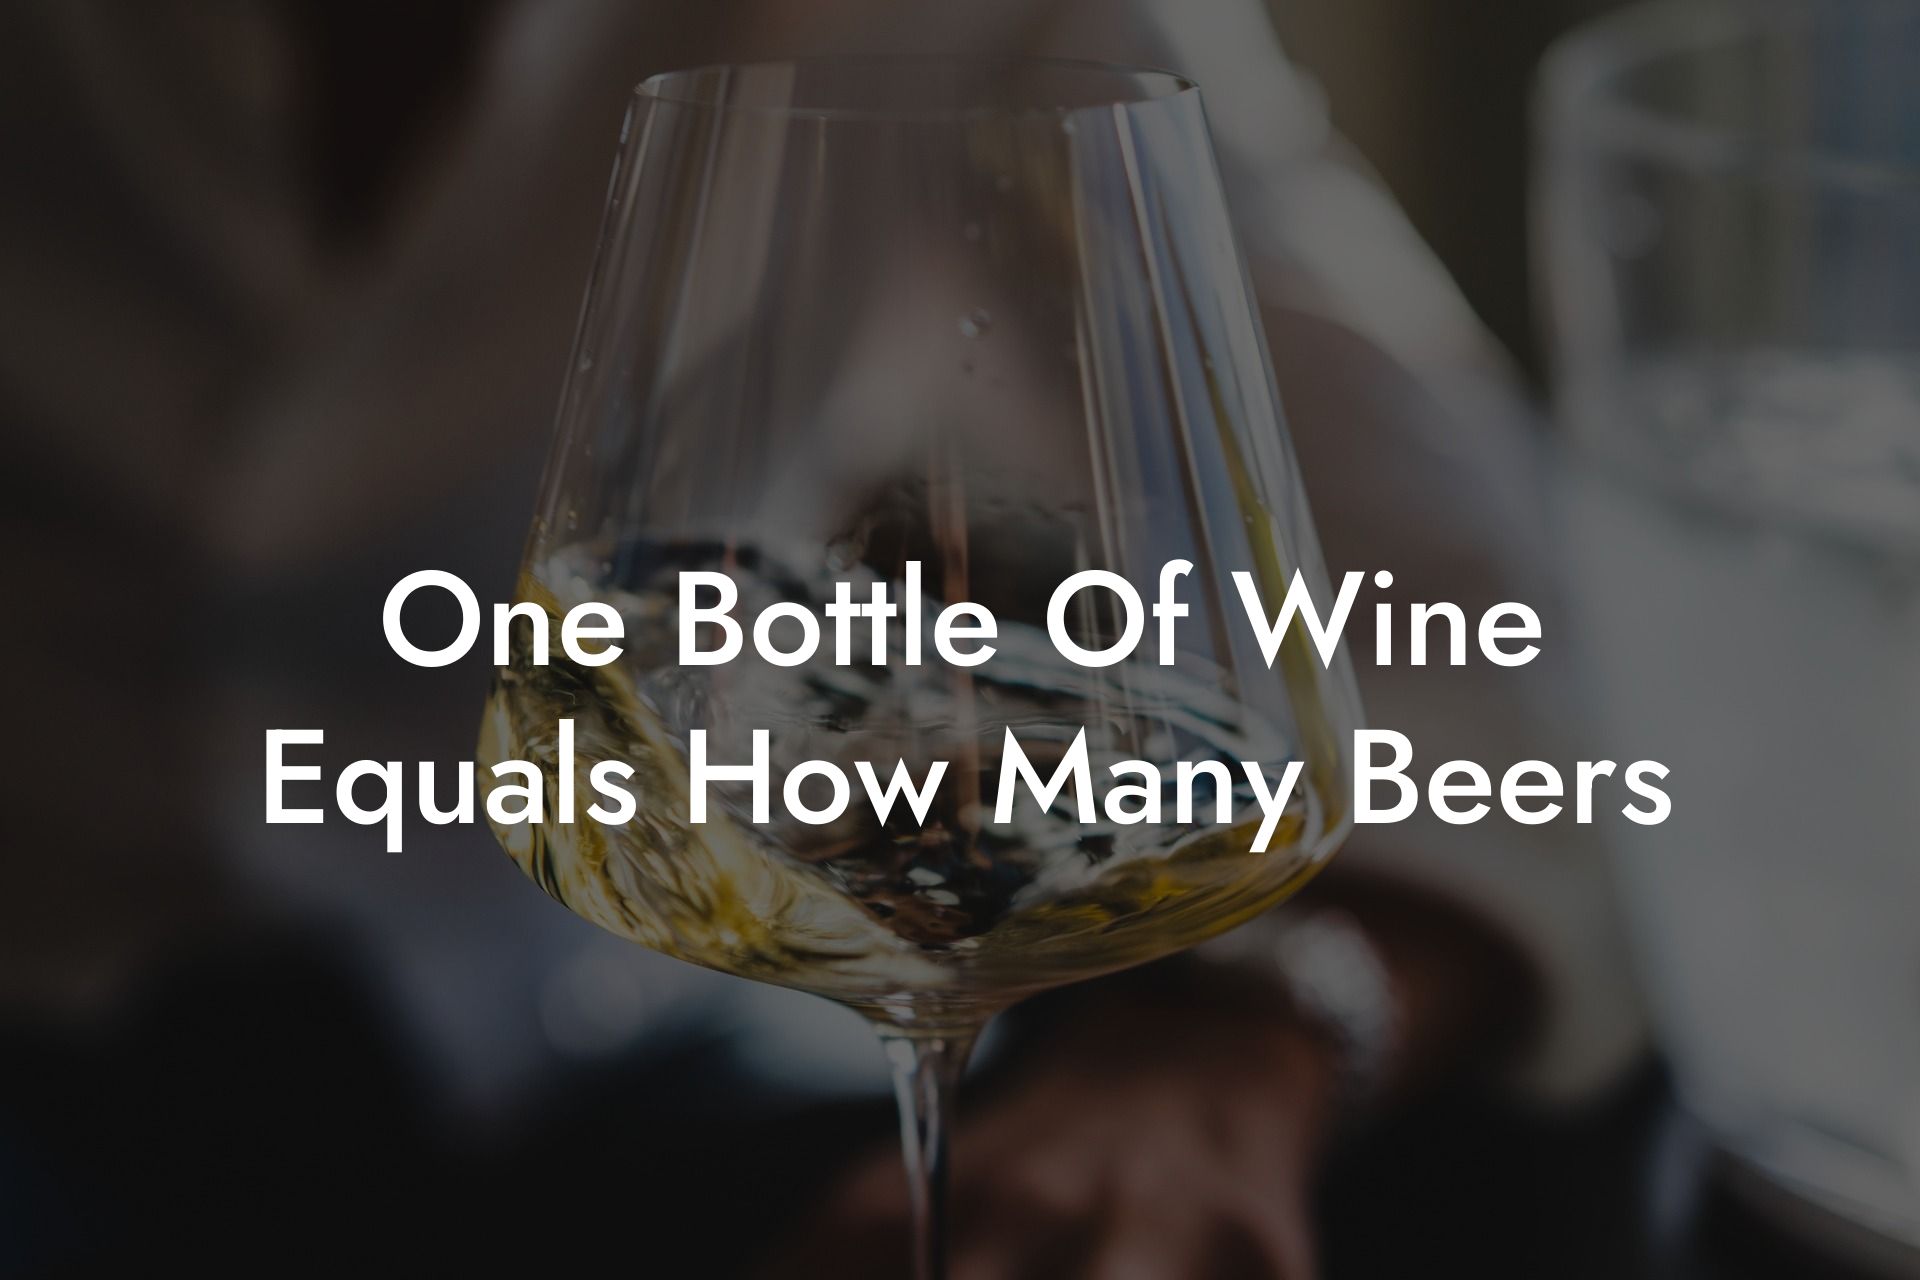 One Bottle Of Wine Equals How Many Beers